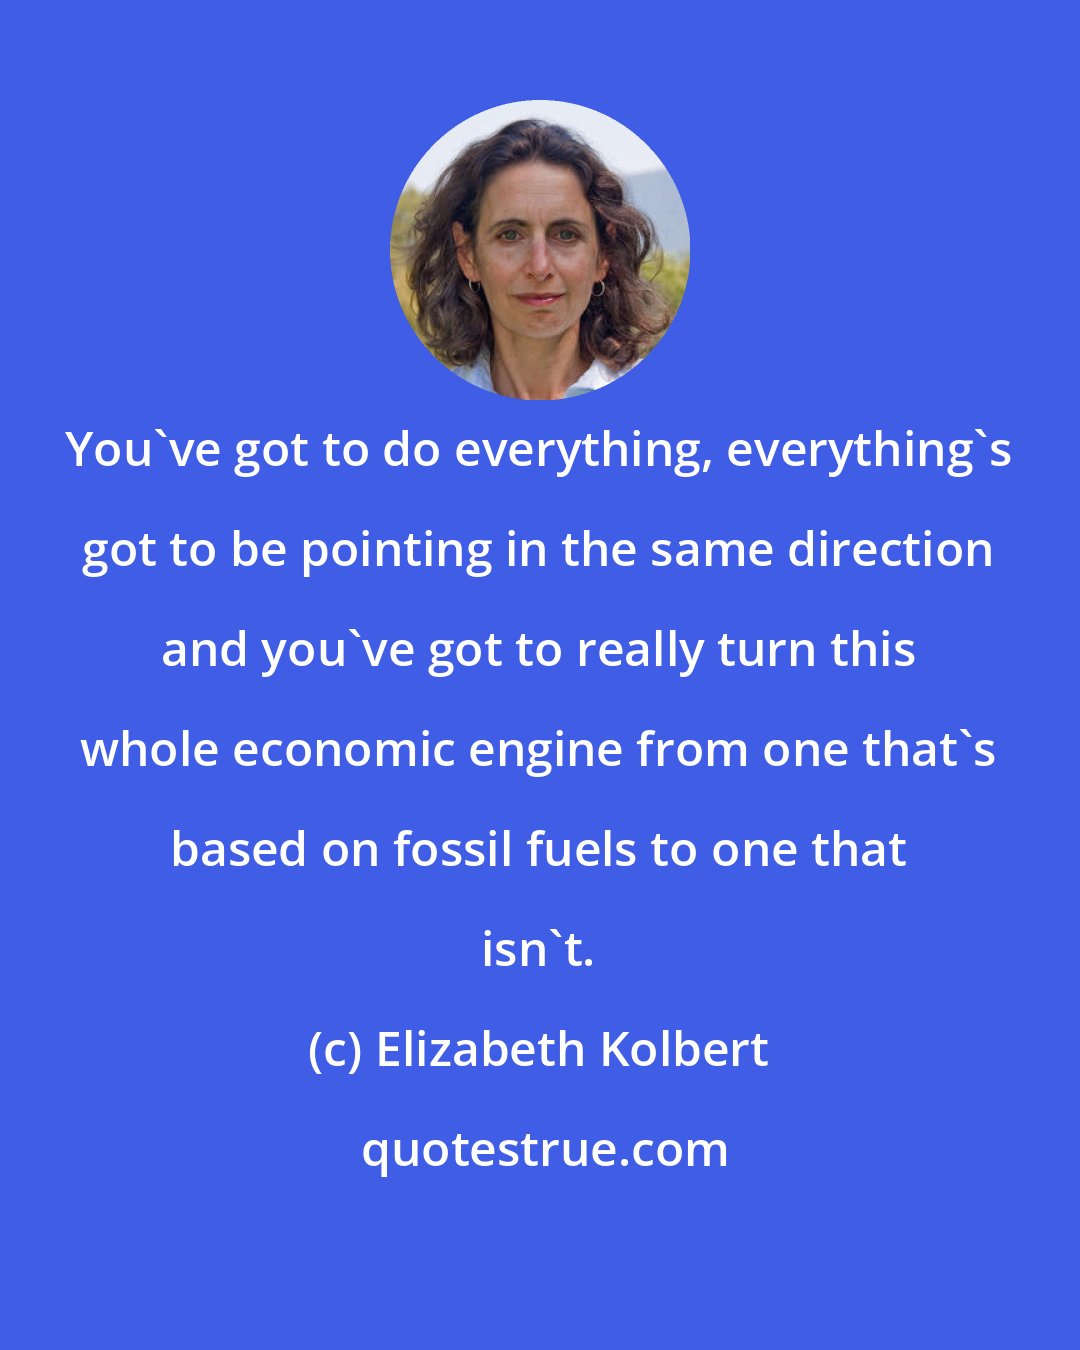 Elizabeth Kolbert: You've got to do everything, everything's got to be pointing in the same direction and you've got to really turn this whole economic engine from one that's based on fossil fuels to one that isn't.